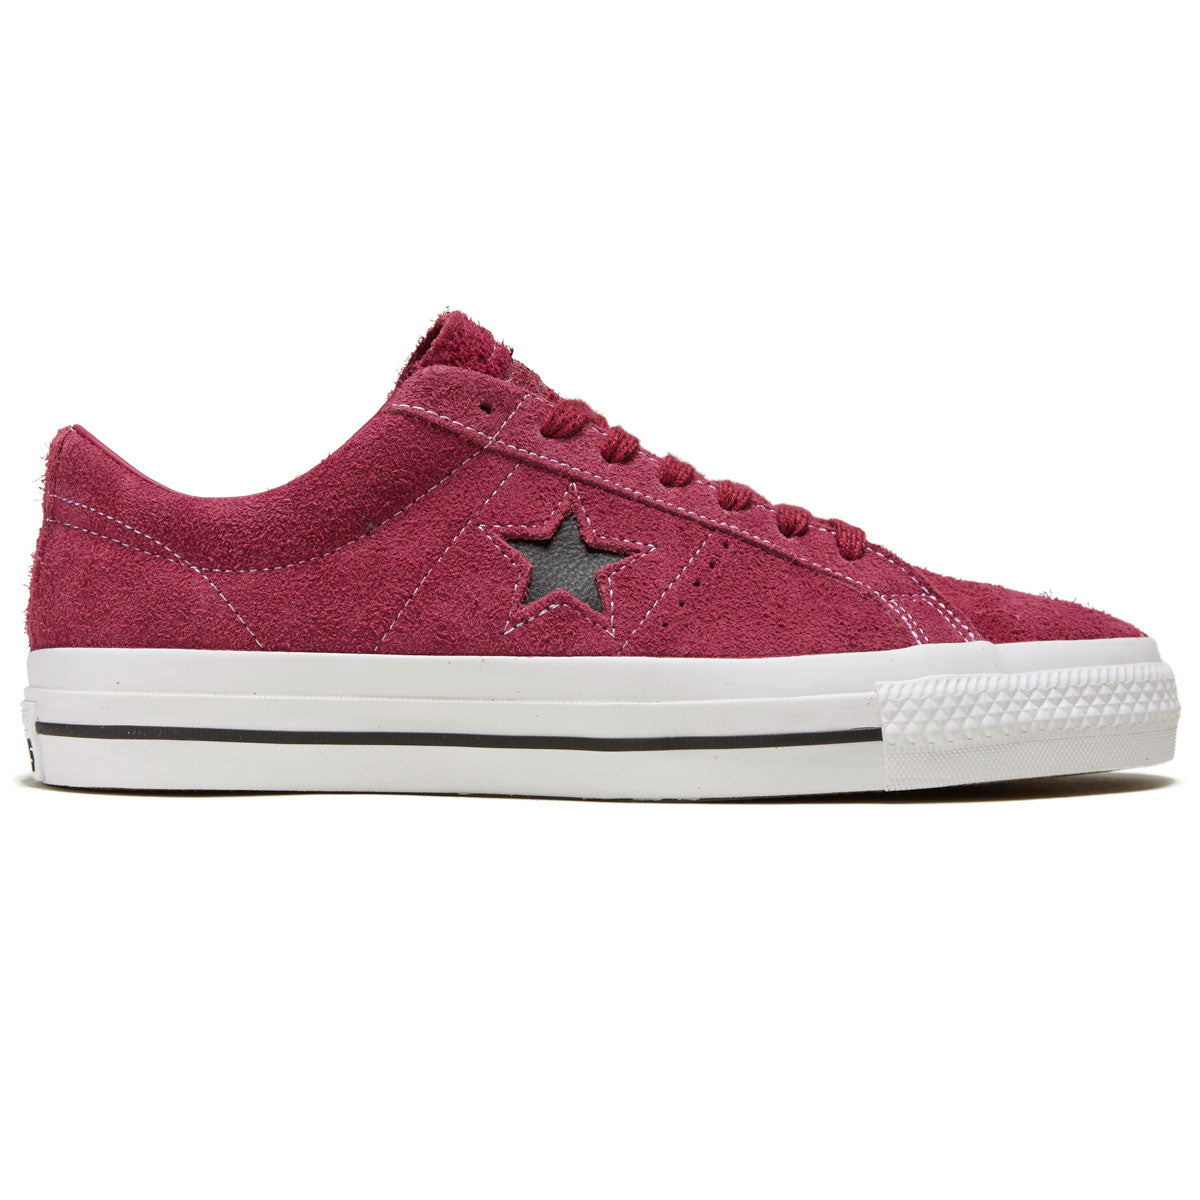 Converse One Star Pro Ox Shoes - Legend Berry/White/Black image 1